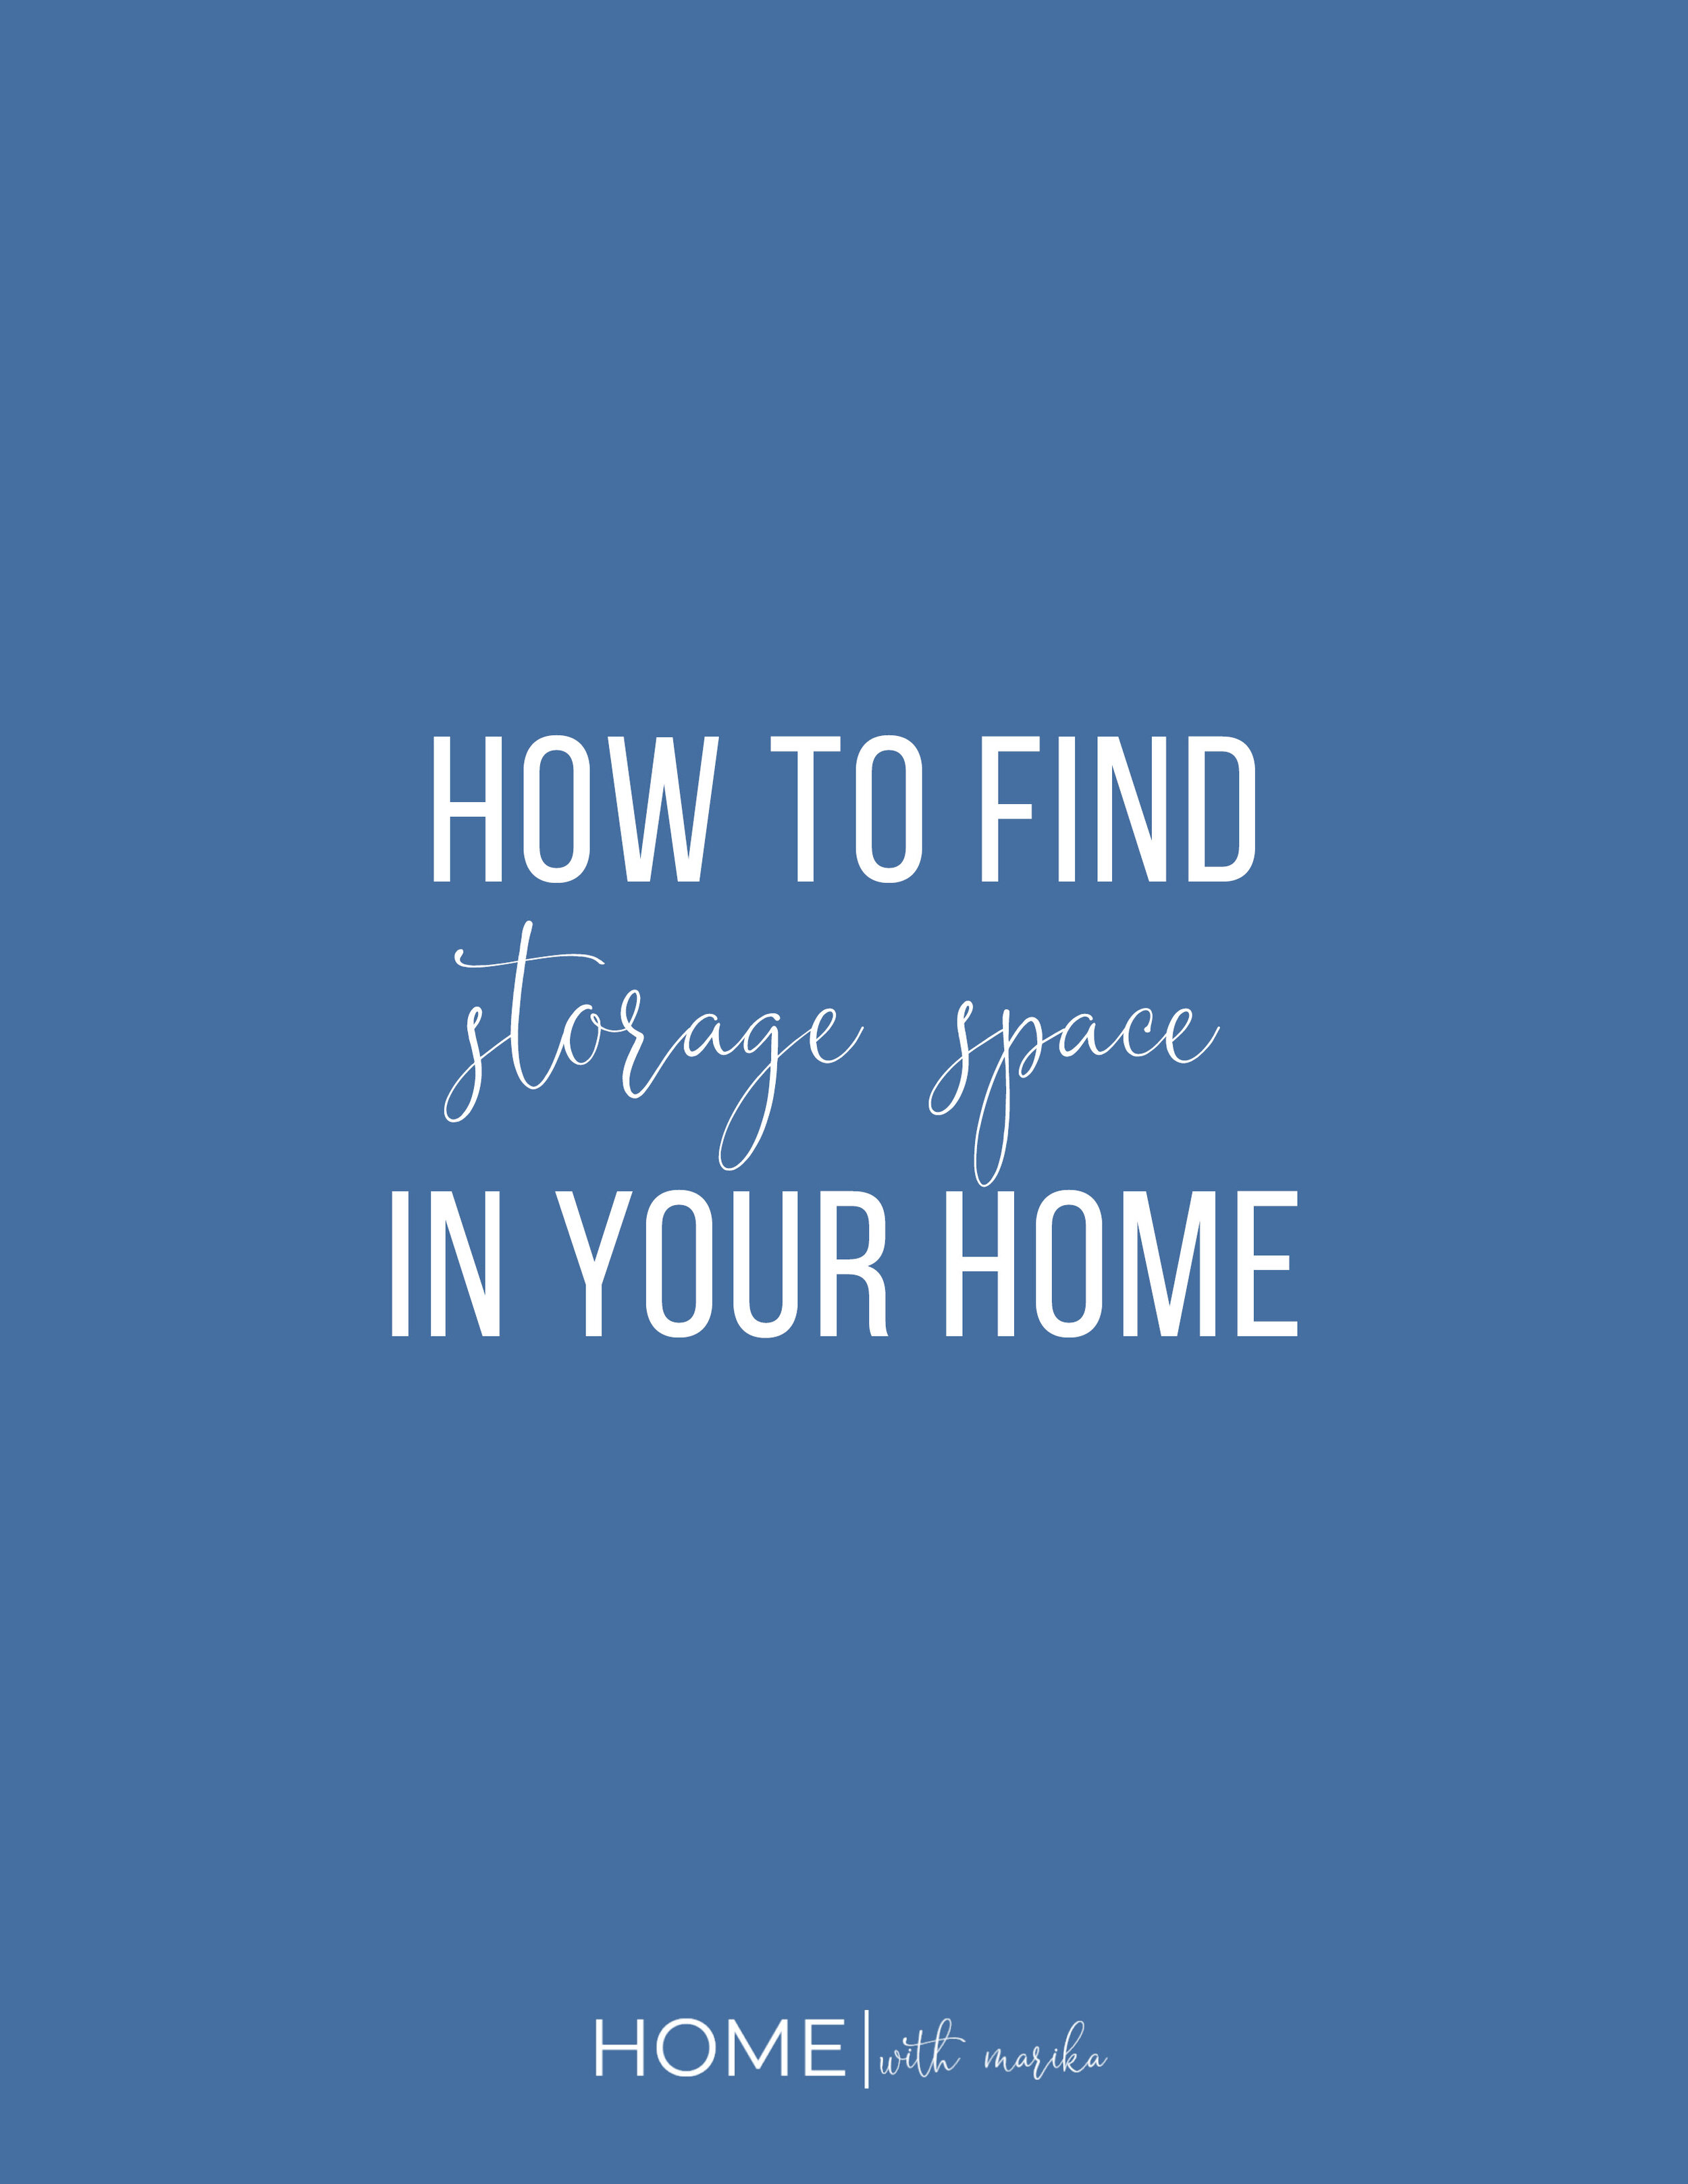 Find Storage Space in Your Home JPEG.jpg